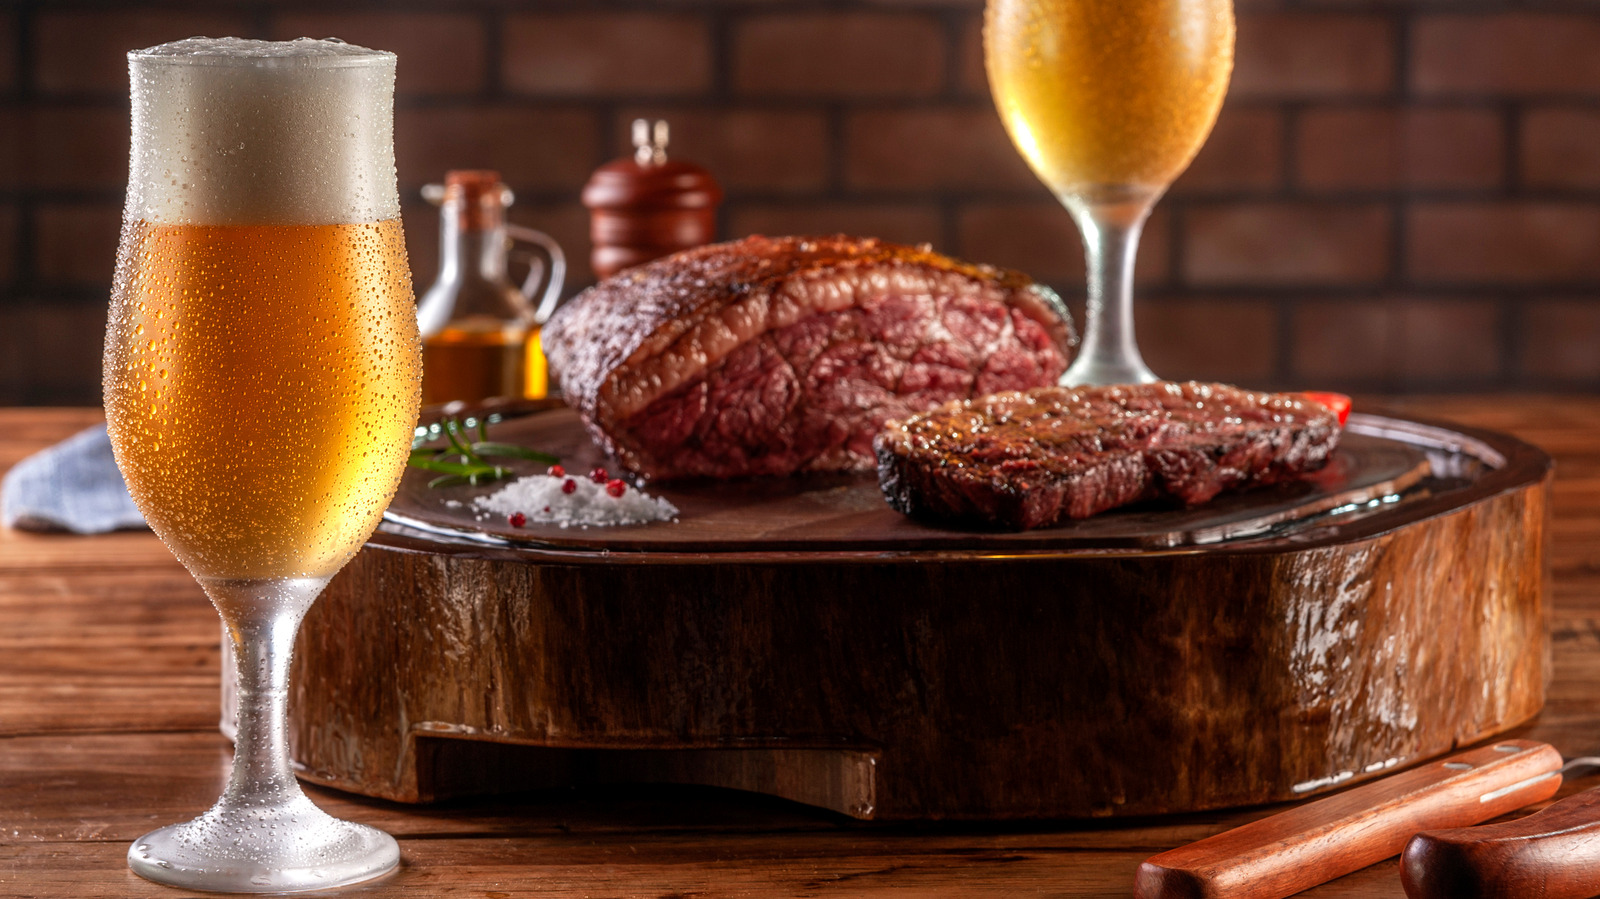 Come & Steak It Beer Can Glass